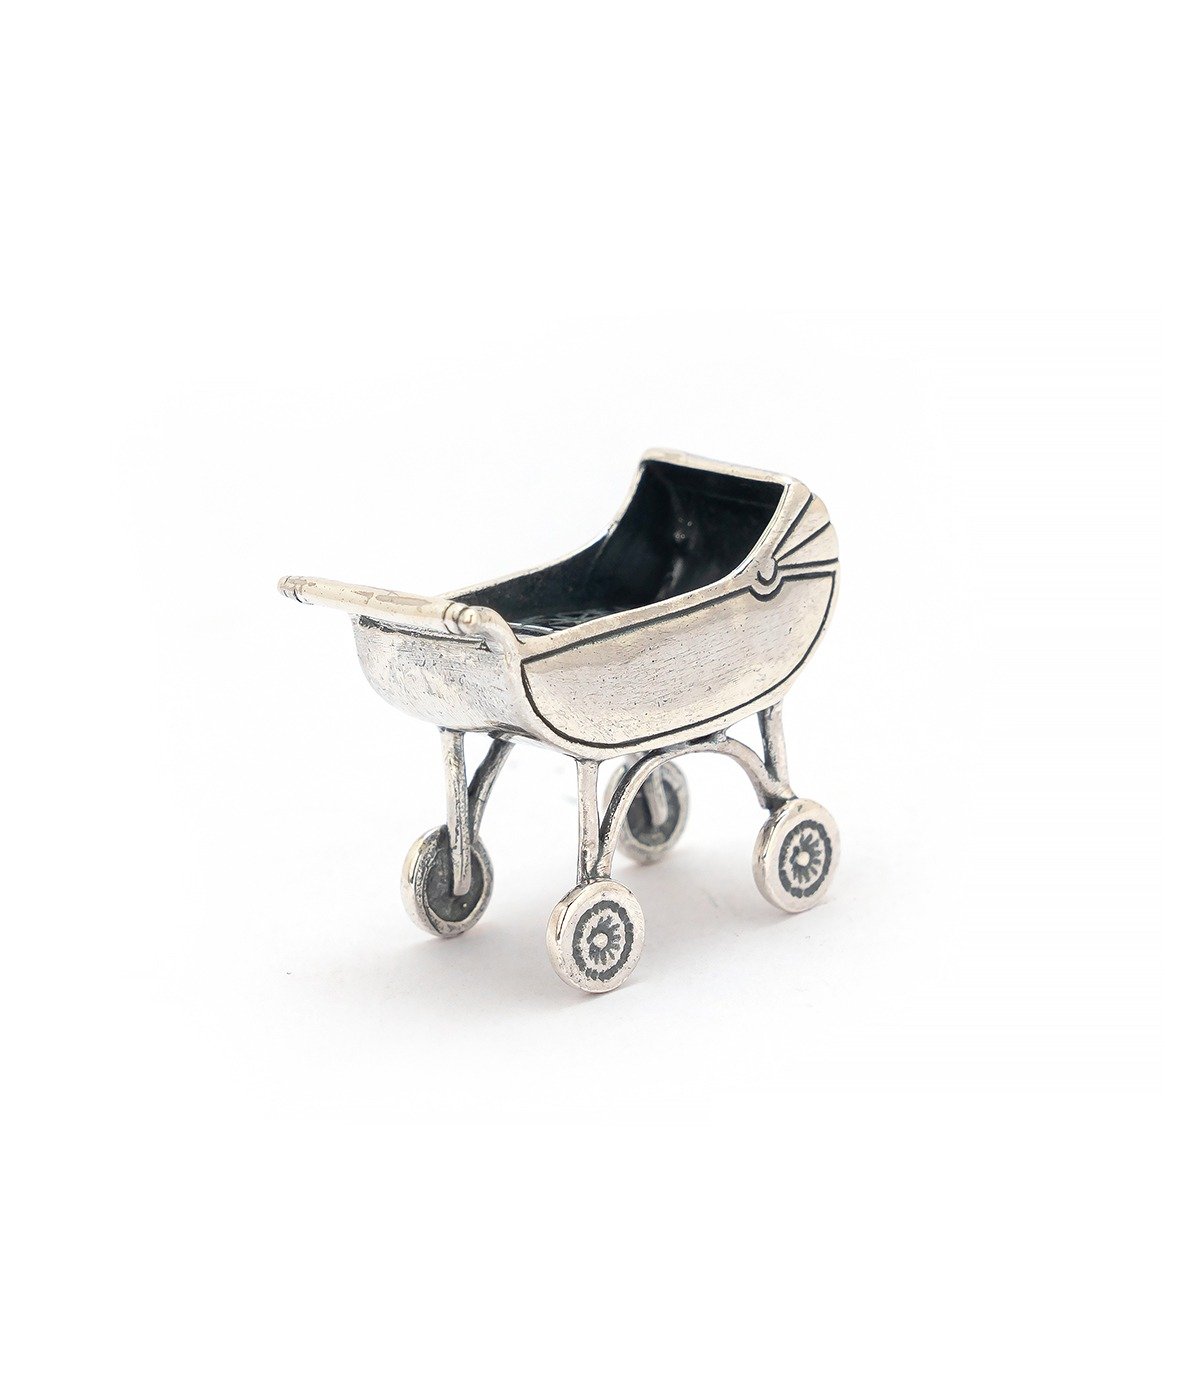 92.5 STERLING SILVER  MINIATURE BABY CARRIAGE FOR GIFT